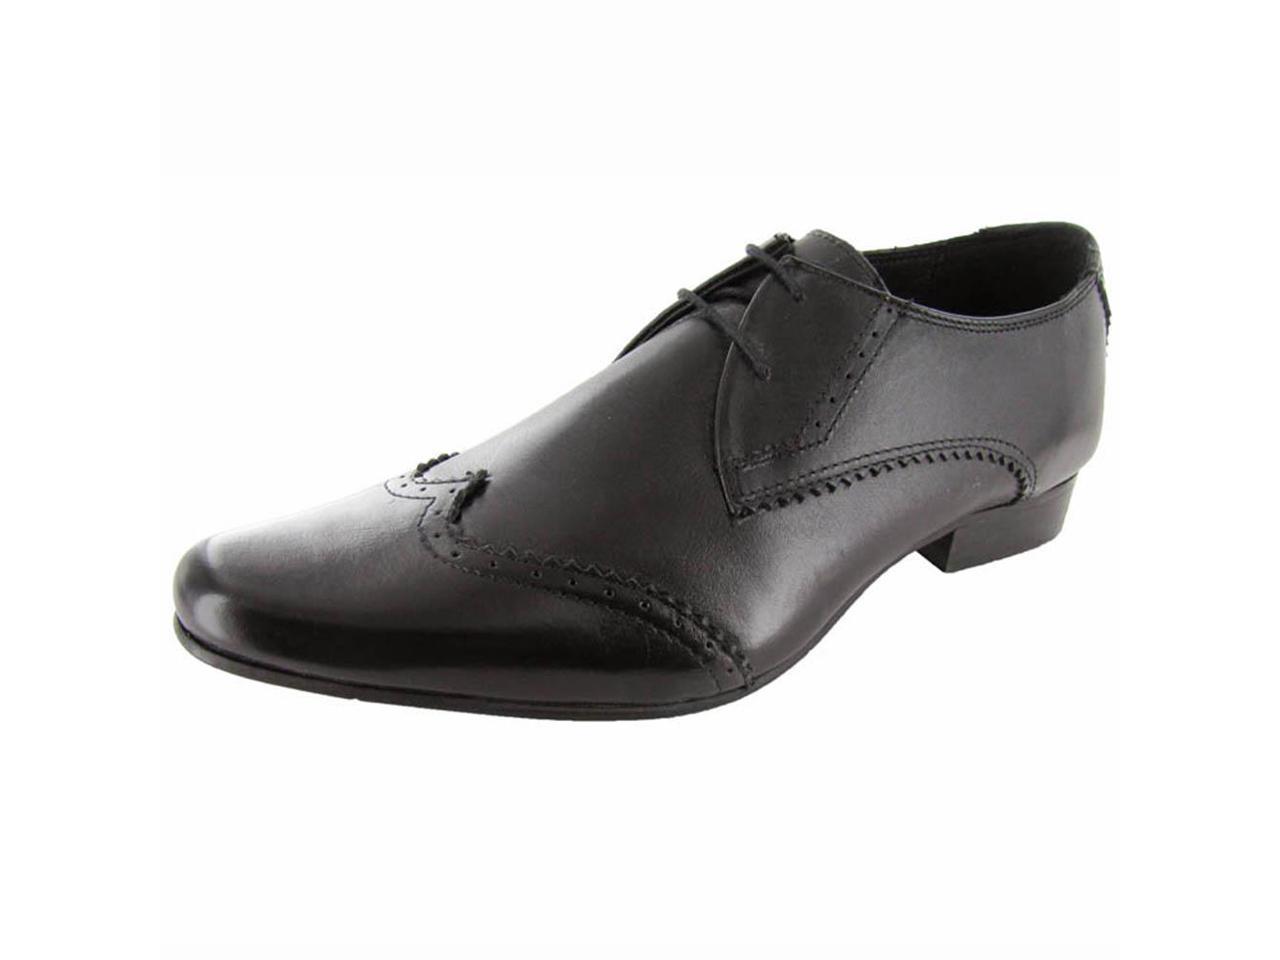 pointed oxford shoes